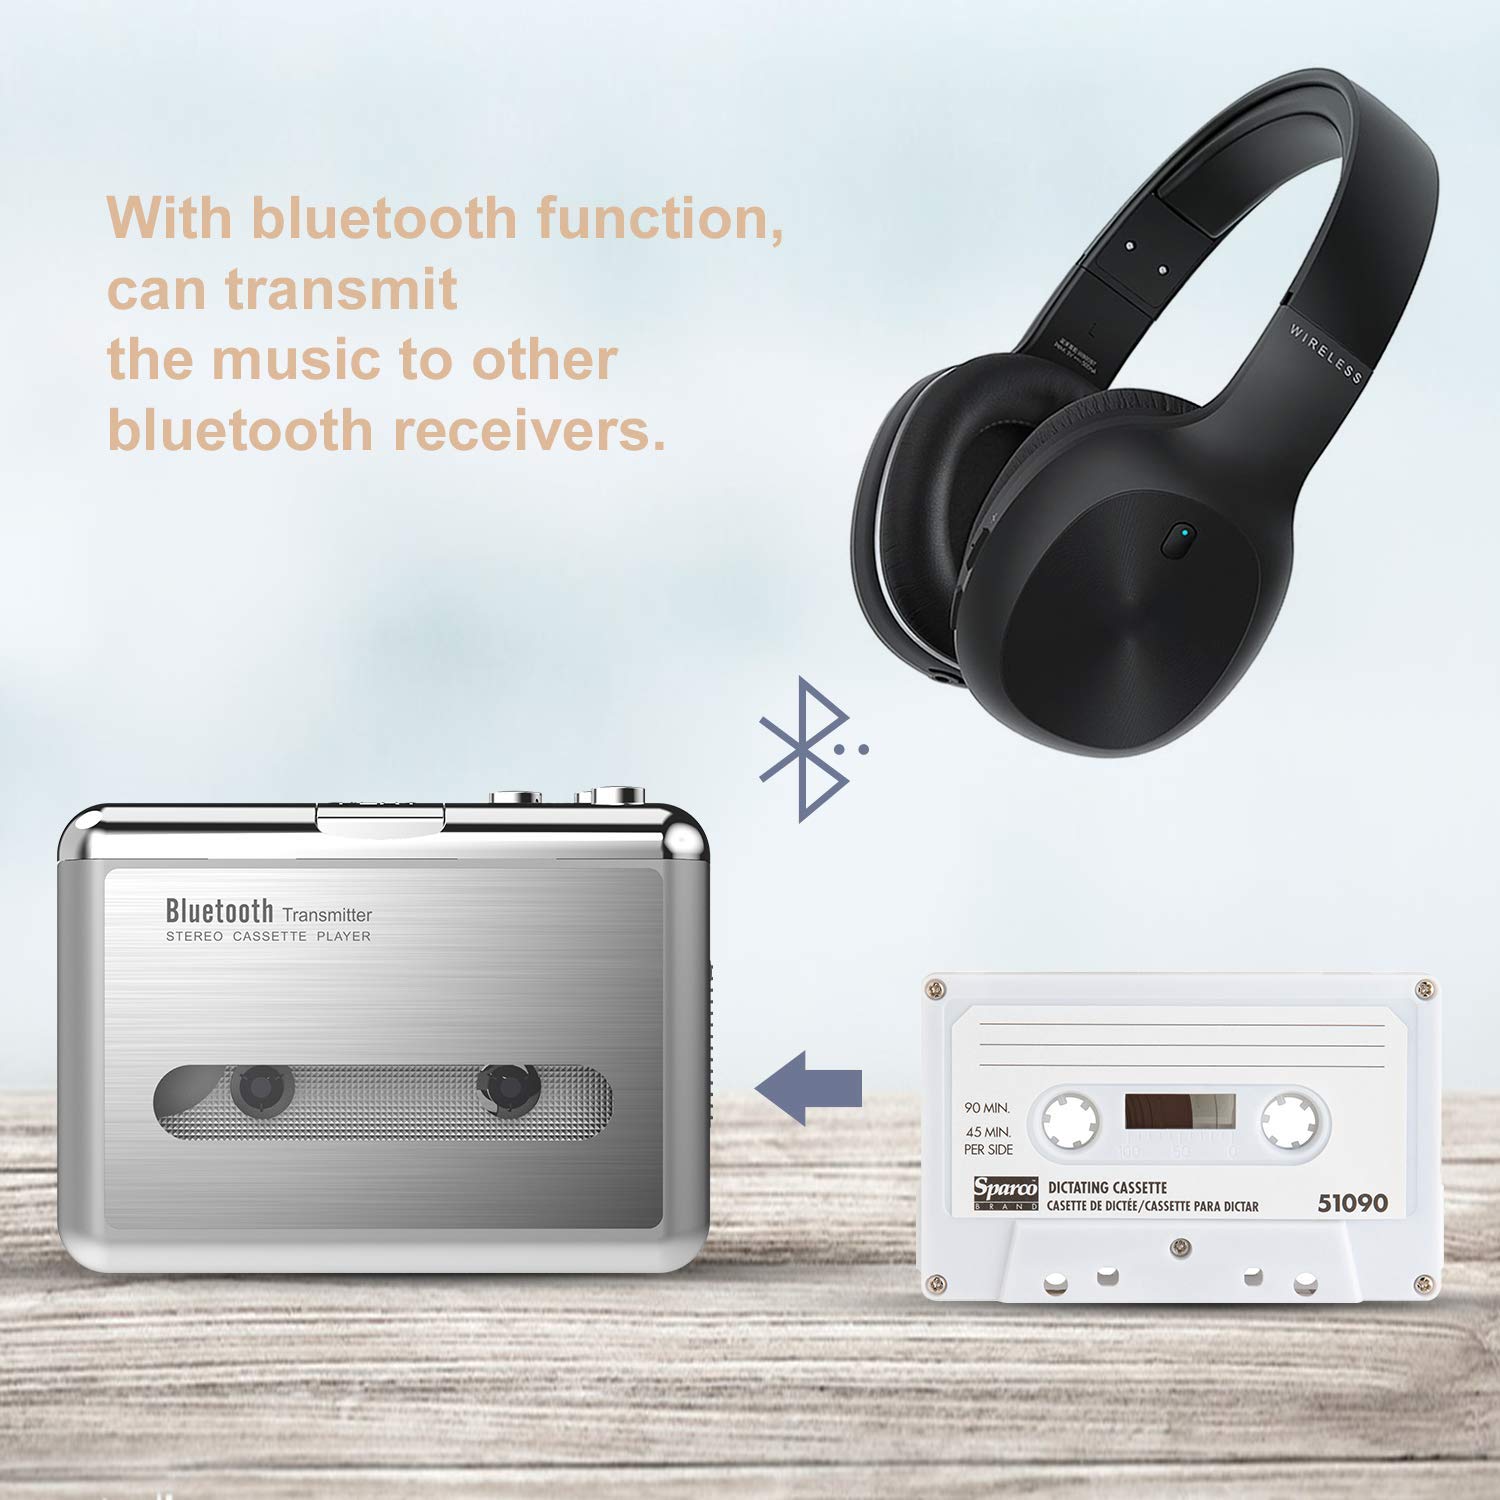 DIGITNOW Bluetooth Walkman Cassette Player Bluetooth Transfer Personal Cassette, 3.5mm Headphone Jack and Earphones Included